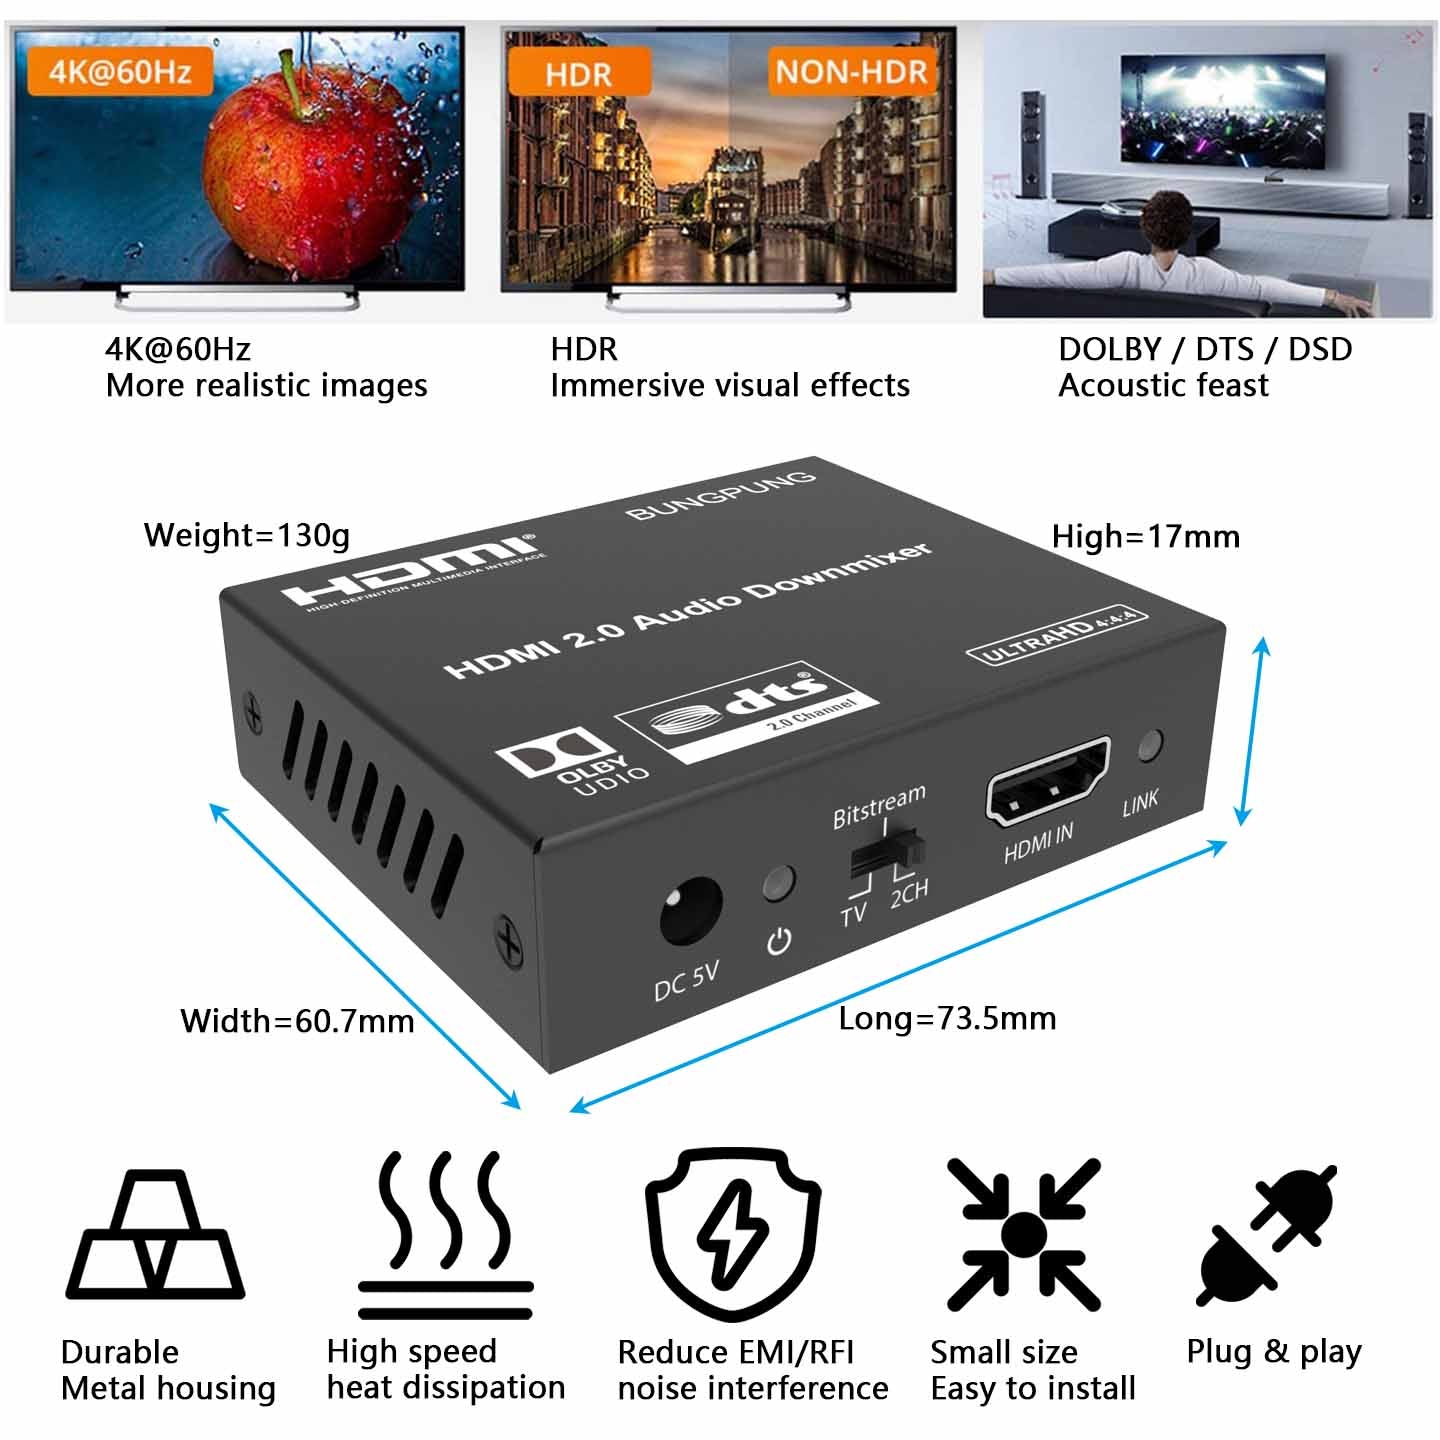 HDMI Audio Extractor Dolby DTS Audio Downmix Decoder size